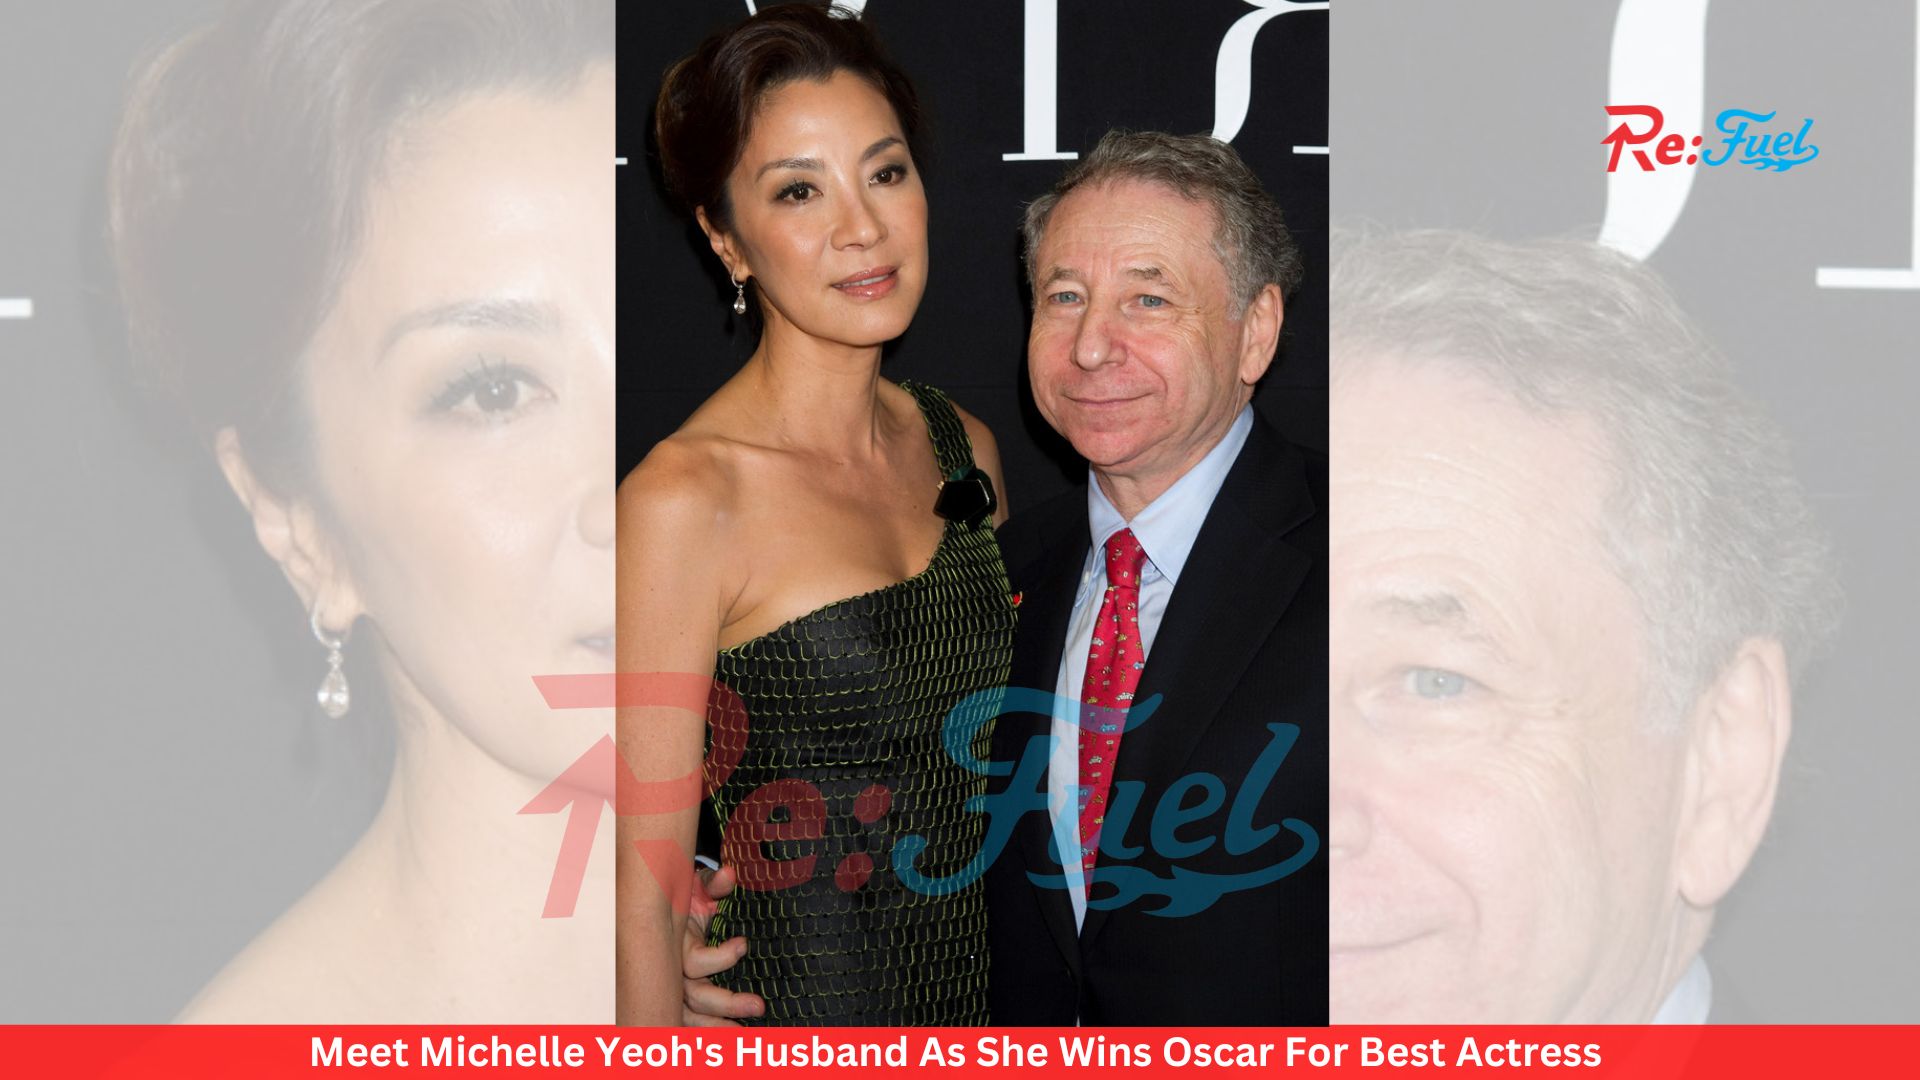 Meet Michelle Yeoh's Husband As She Wins Oscar For Best Actress